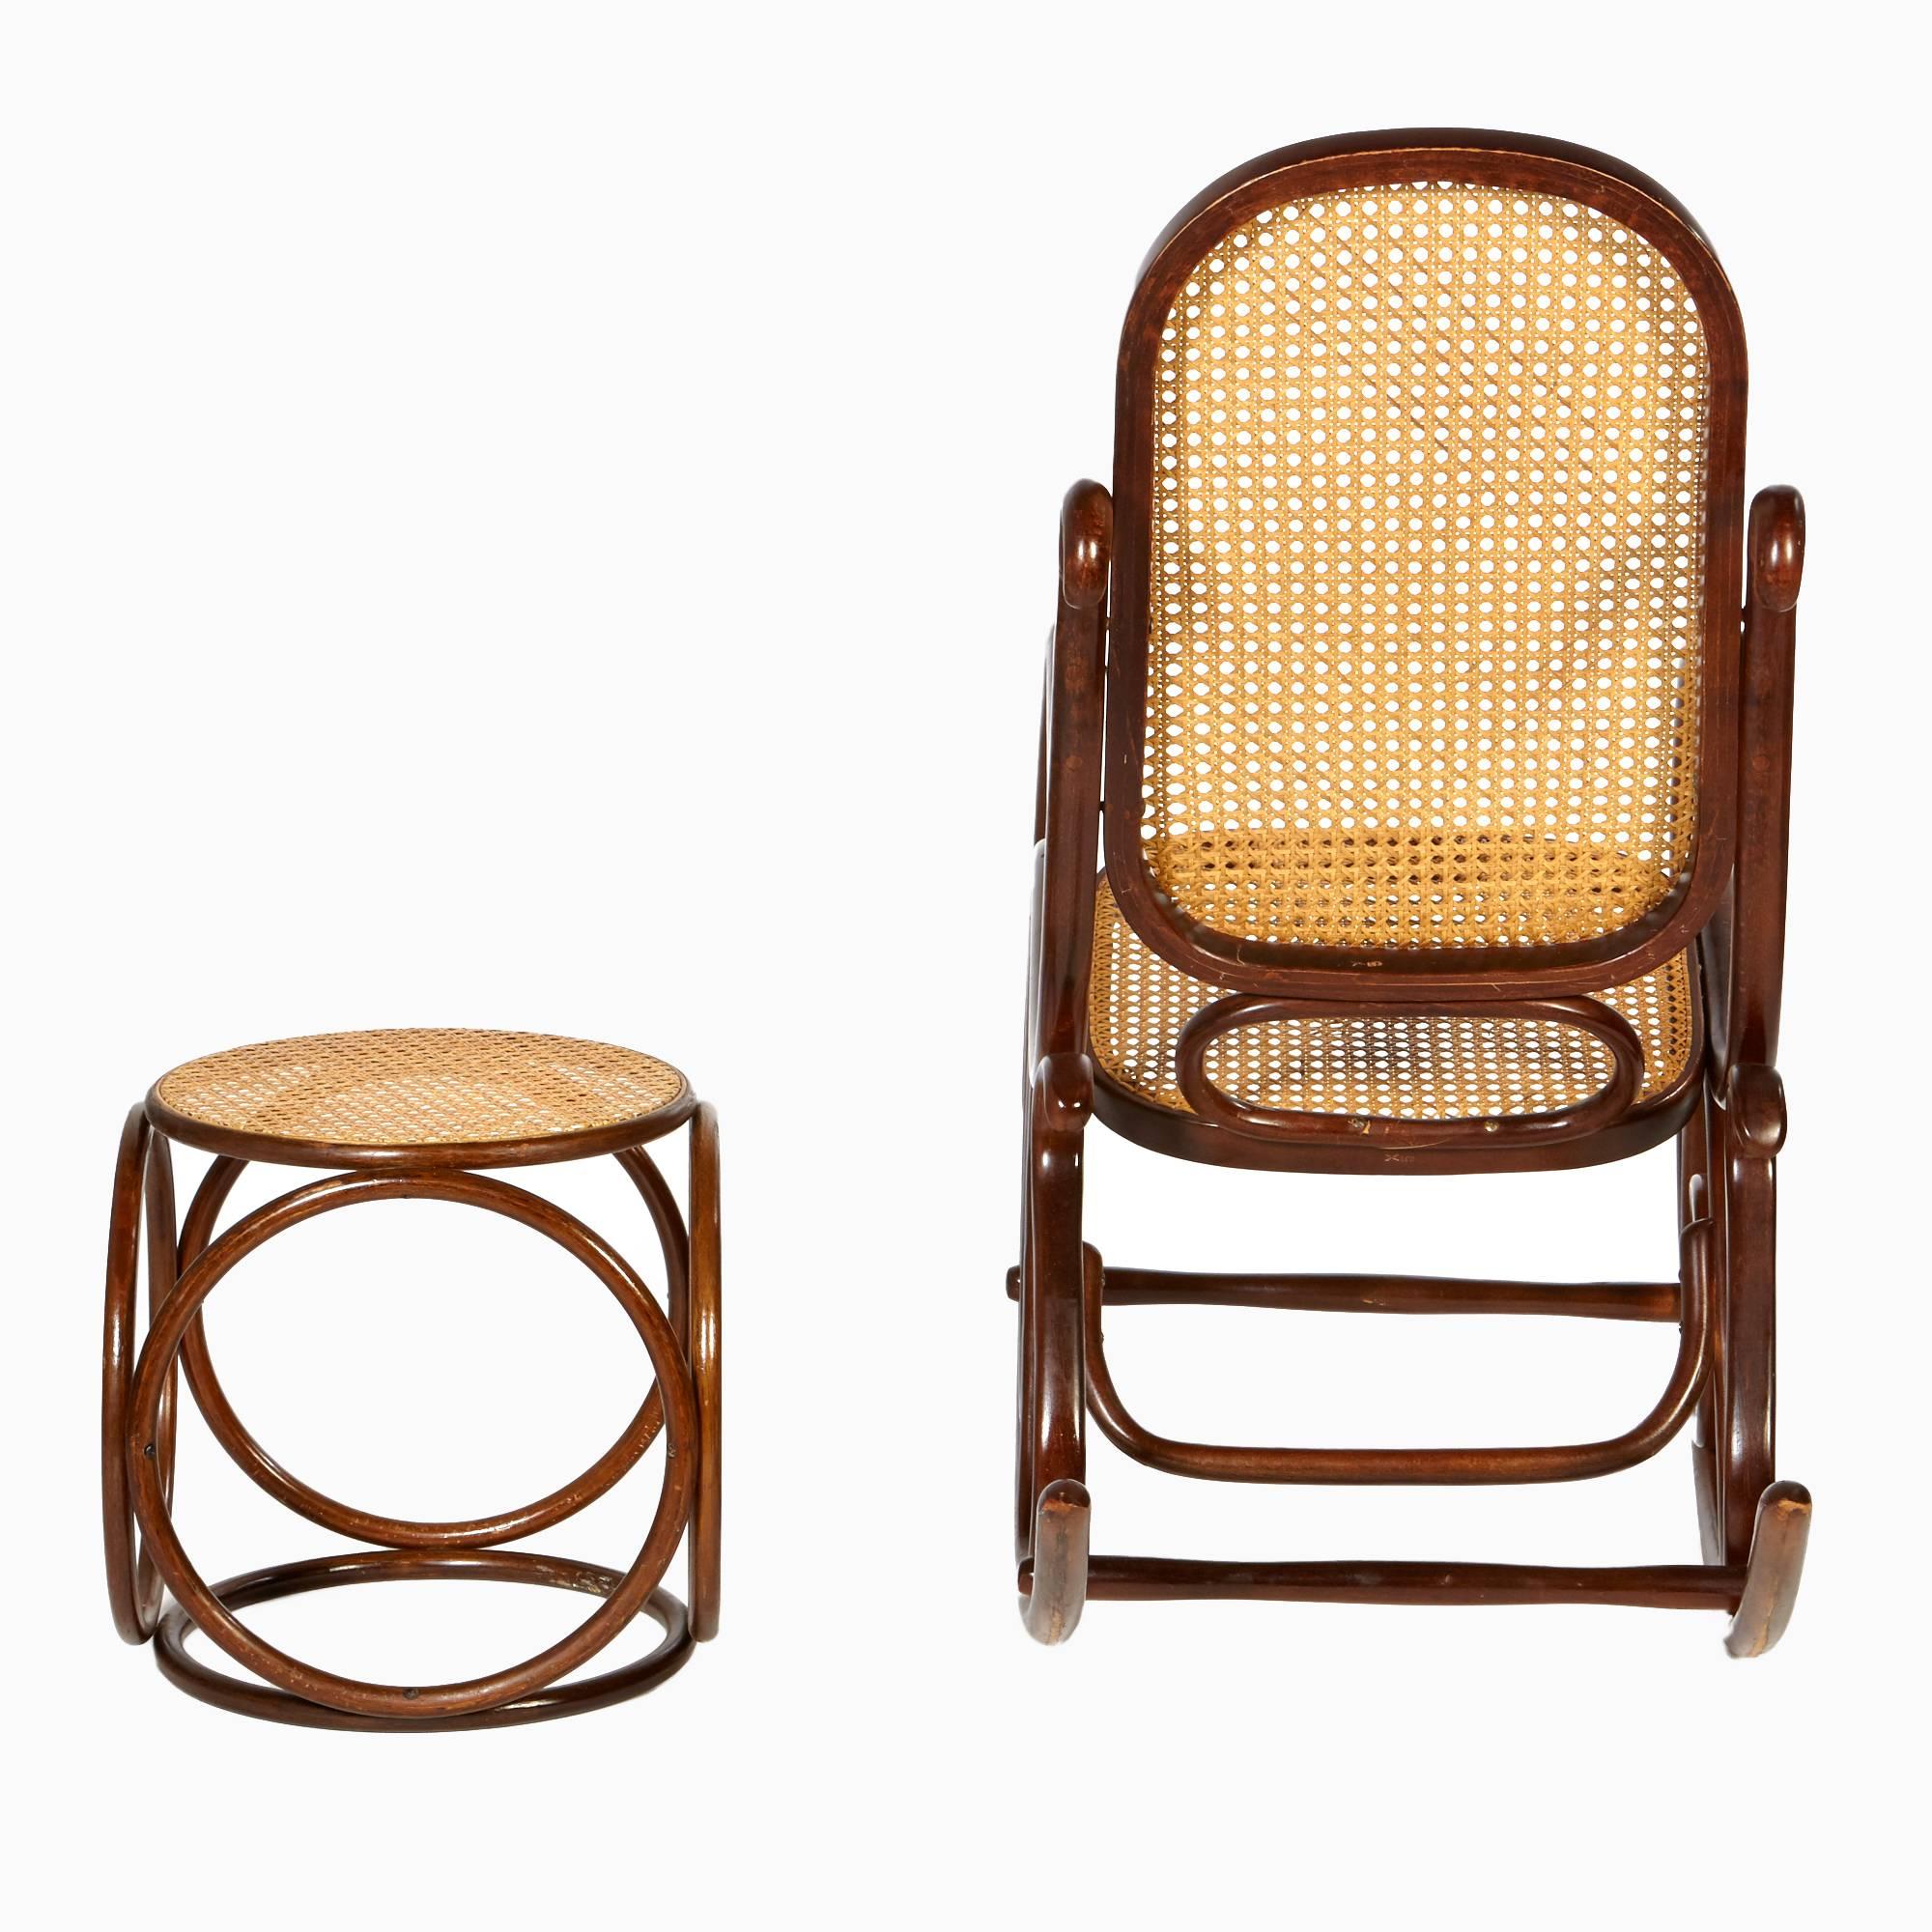 American Mid-20th Century Thonet-Style Rocking Chair and Ottoman